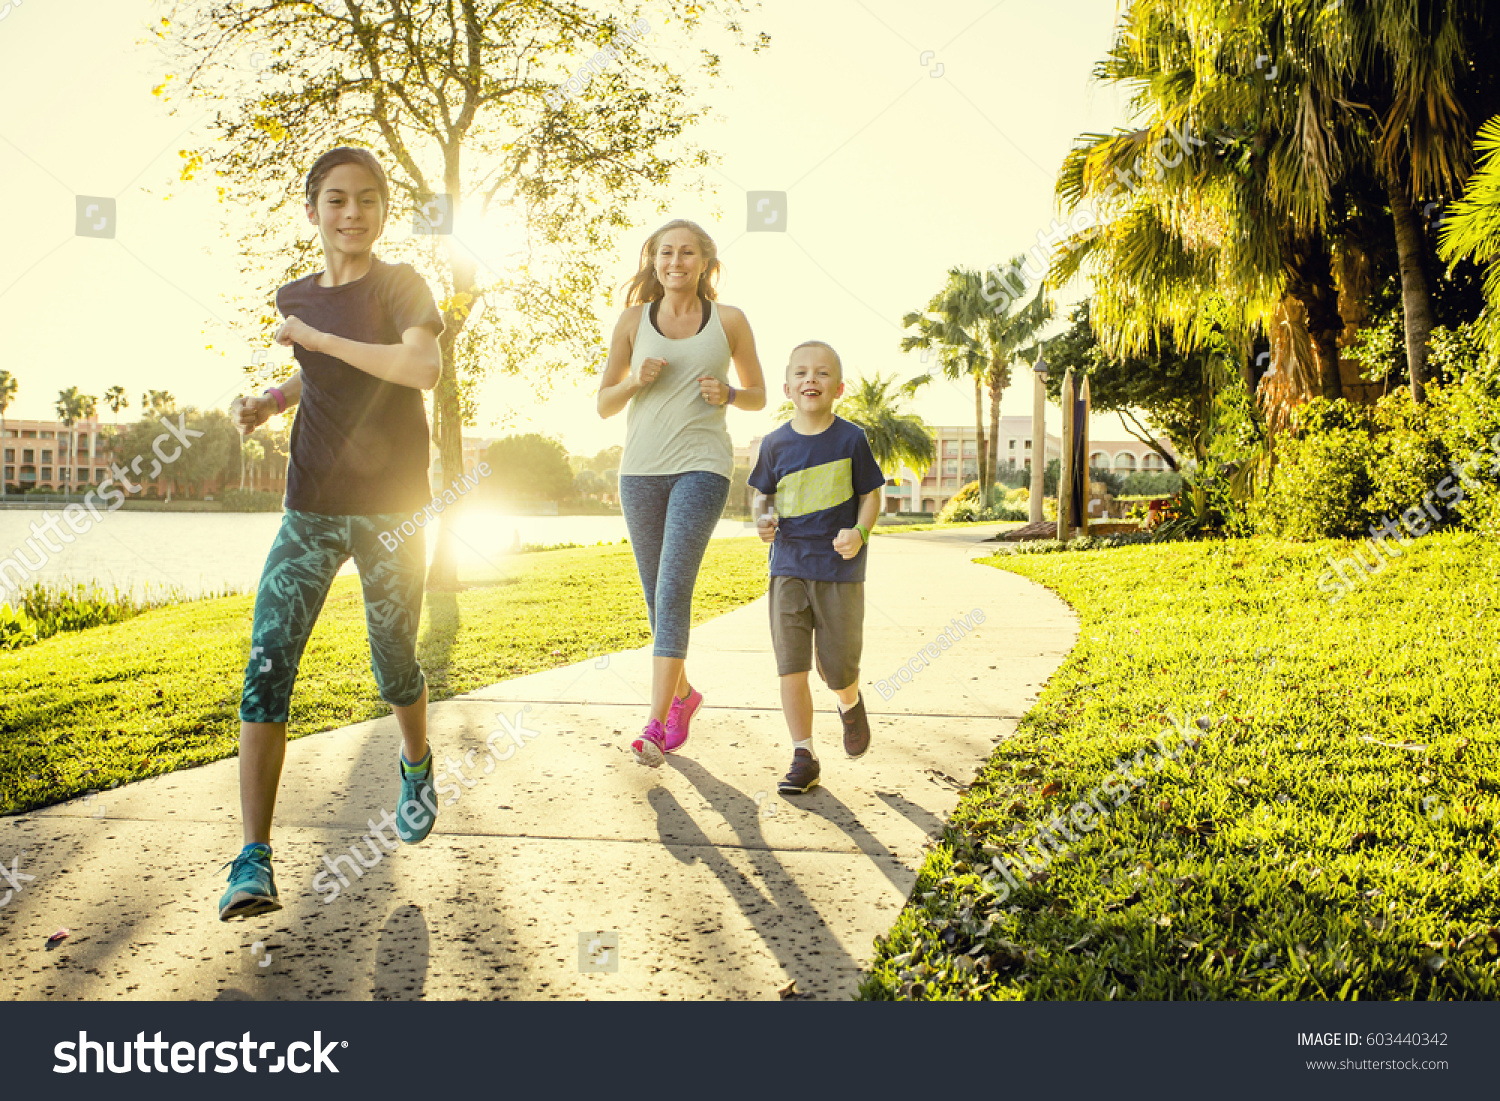 Family exercising and jogging together at the park #603440342